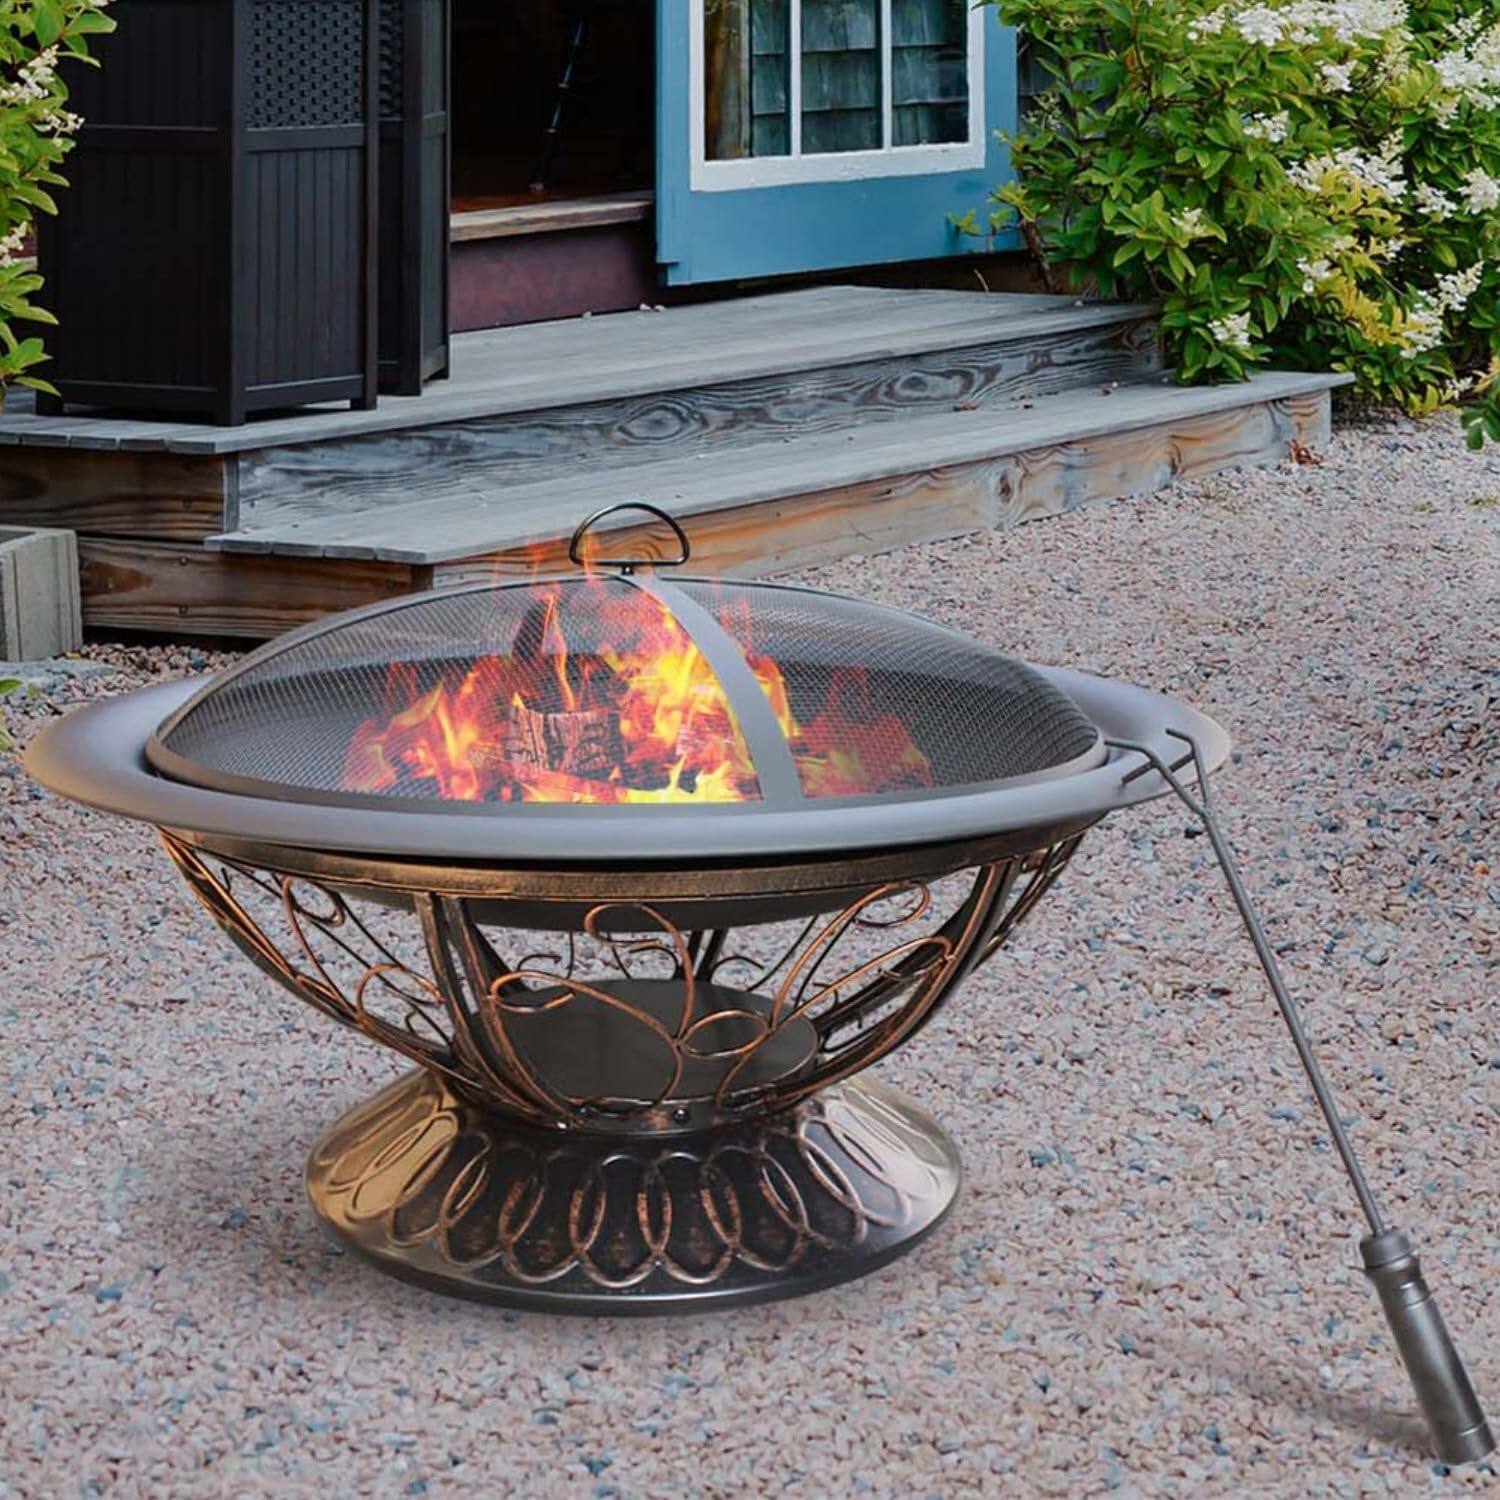 30" Portable Fire Pits for Outside -OEM Fire Pit Factory